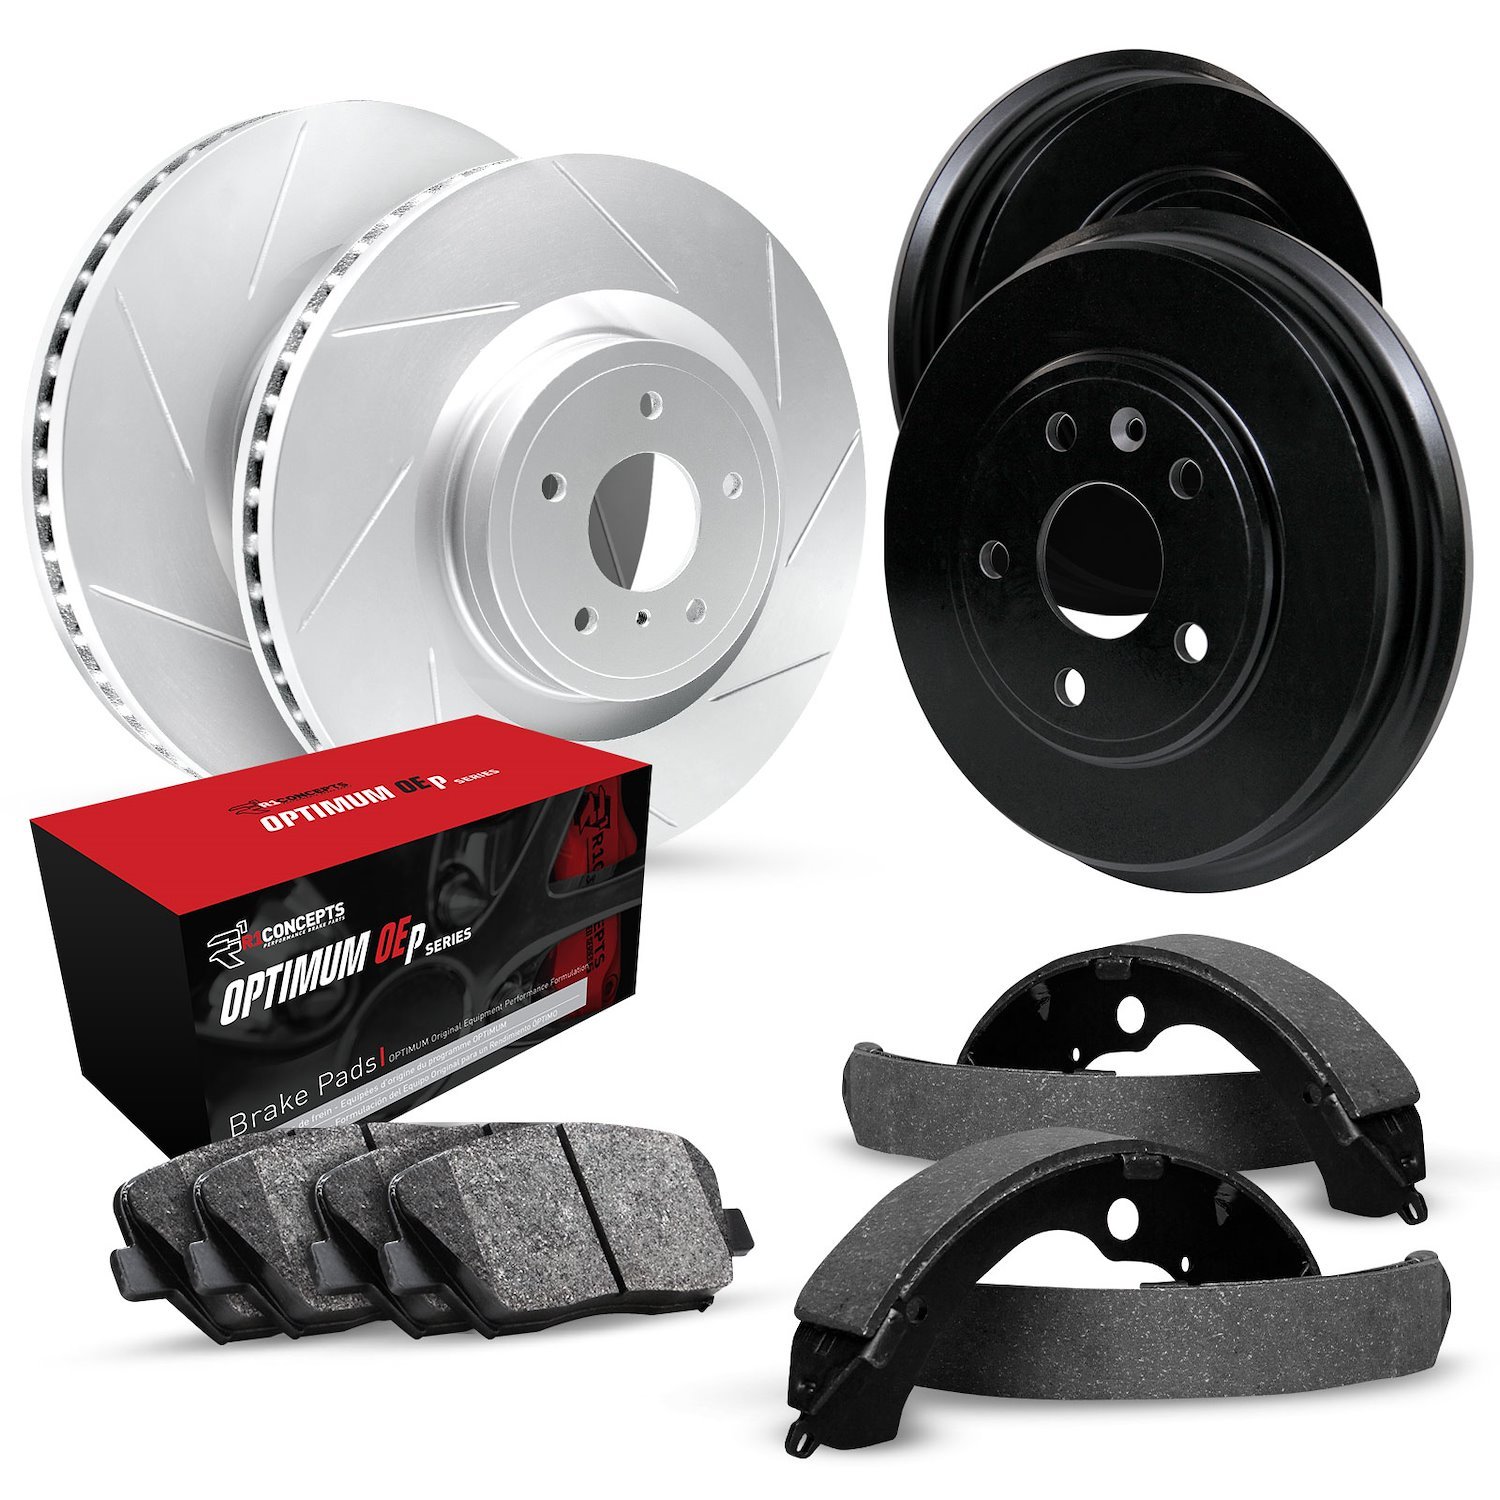 GEO-Carbon Slotted Brake Rotor & Drum Set w/Optimum OE Pads & Shoes, 1975-1985 Ford/Lincoln/Mercury/Mazda